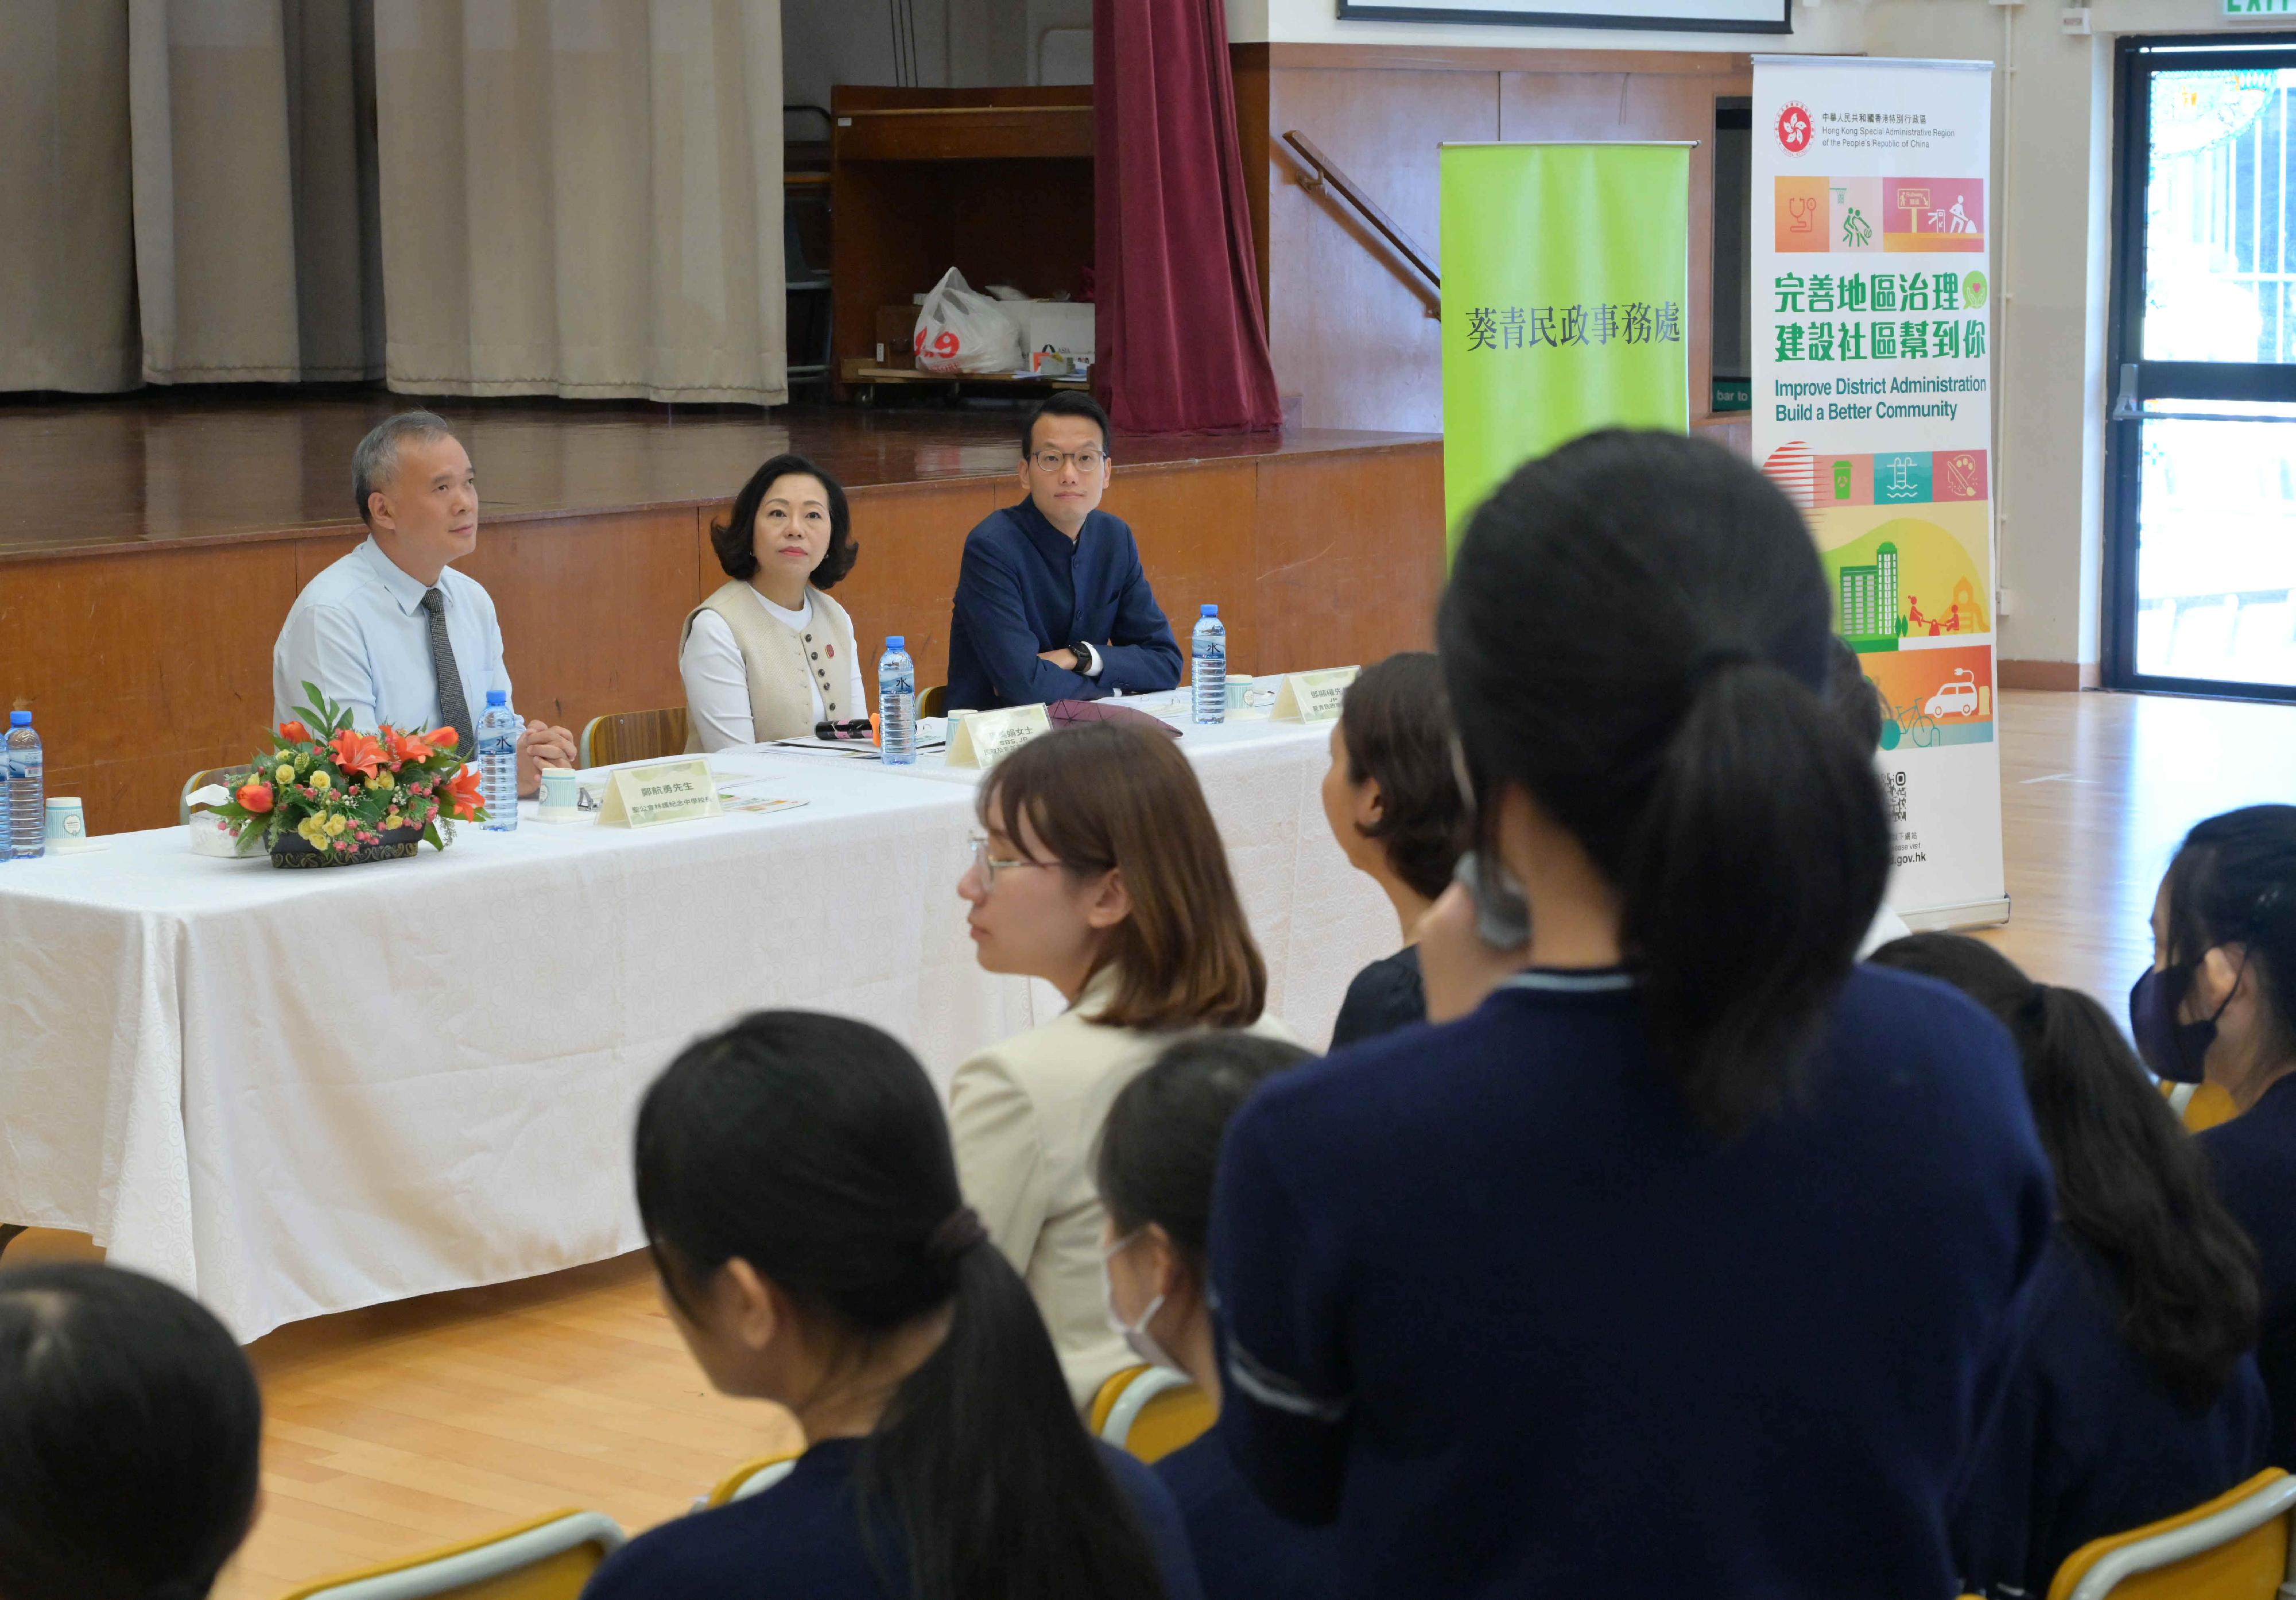 The Secretary for Home and Youth Affairs, Miss Alice Mak, today (October 12) visited a secondary school in Kwai Chung to share with teachers and students the Government's work on improving district governance. Photo shows Miss Mak (second left) listening to views of a student at the briefing session.
